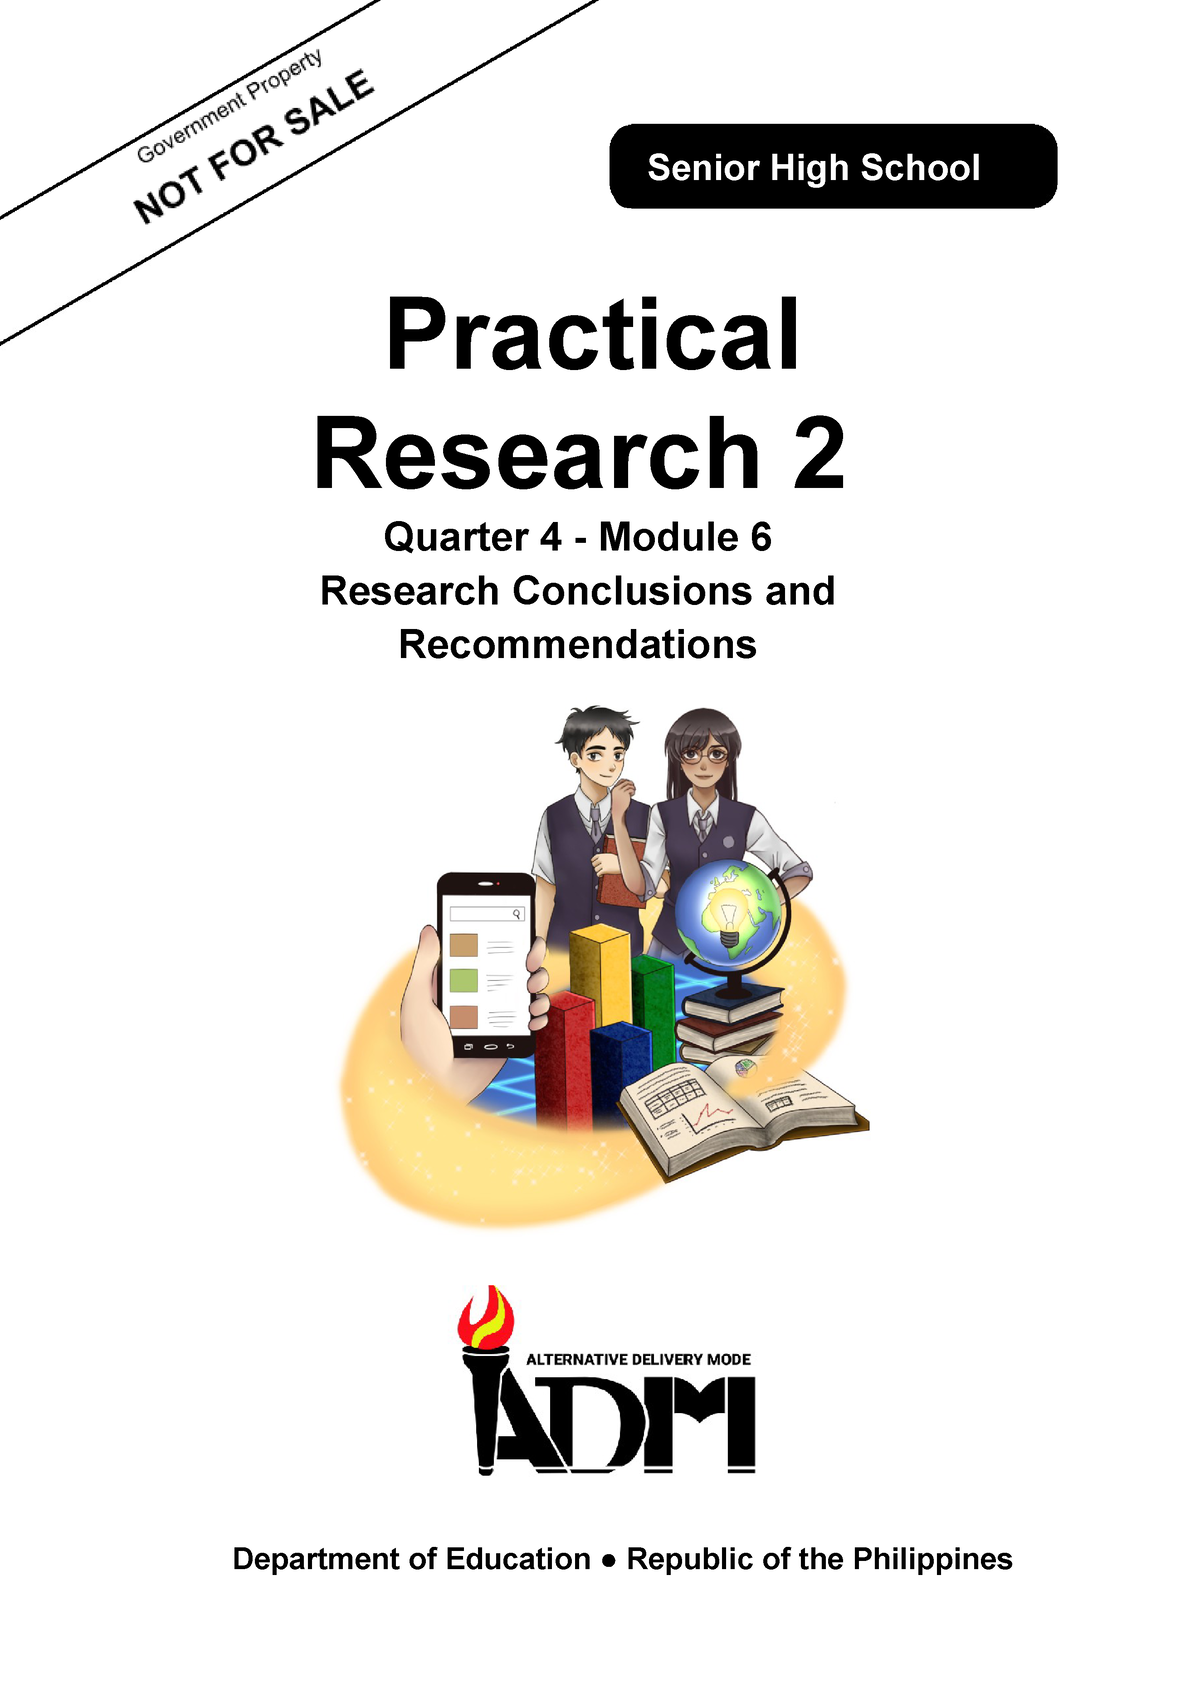 practical research 2 review of related literature module